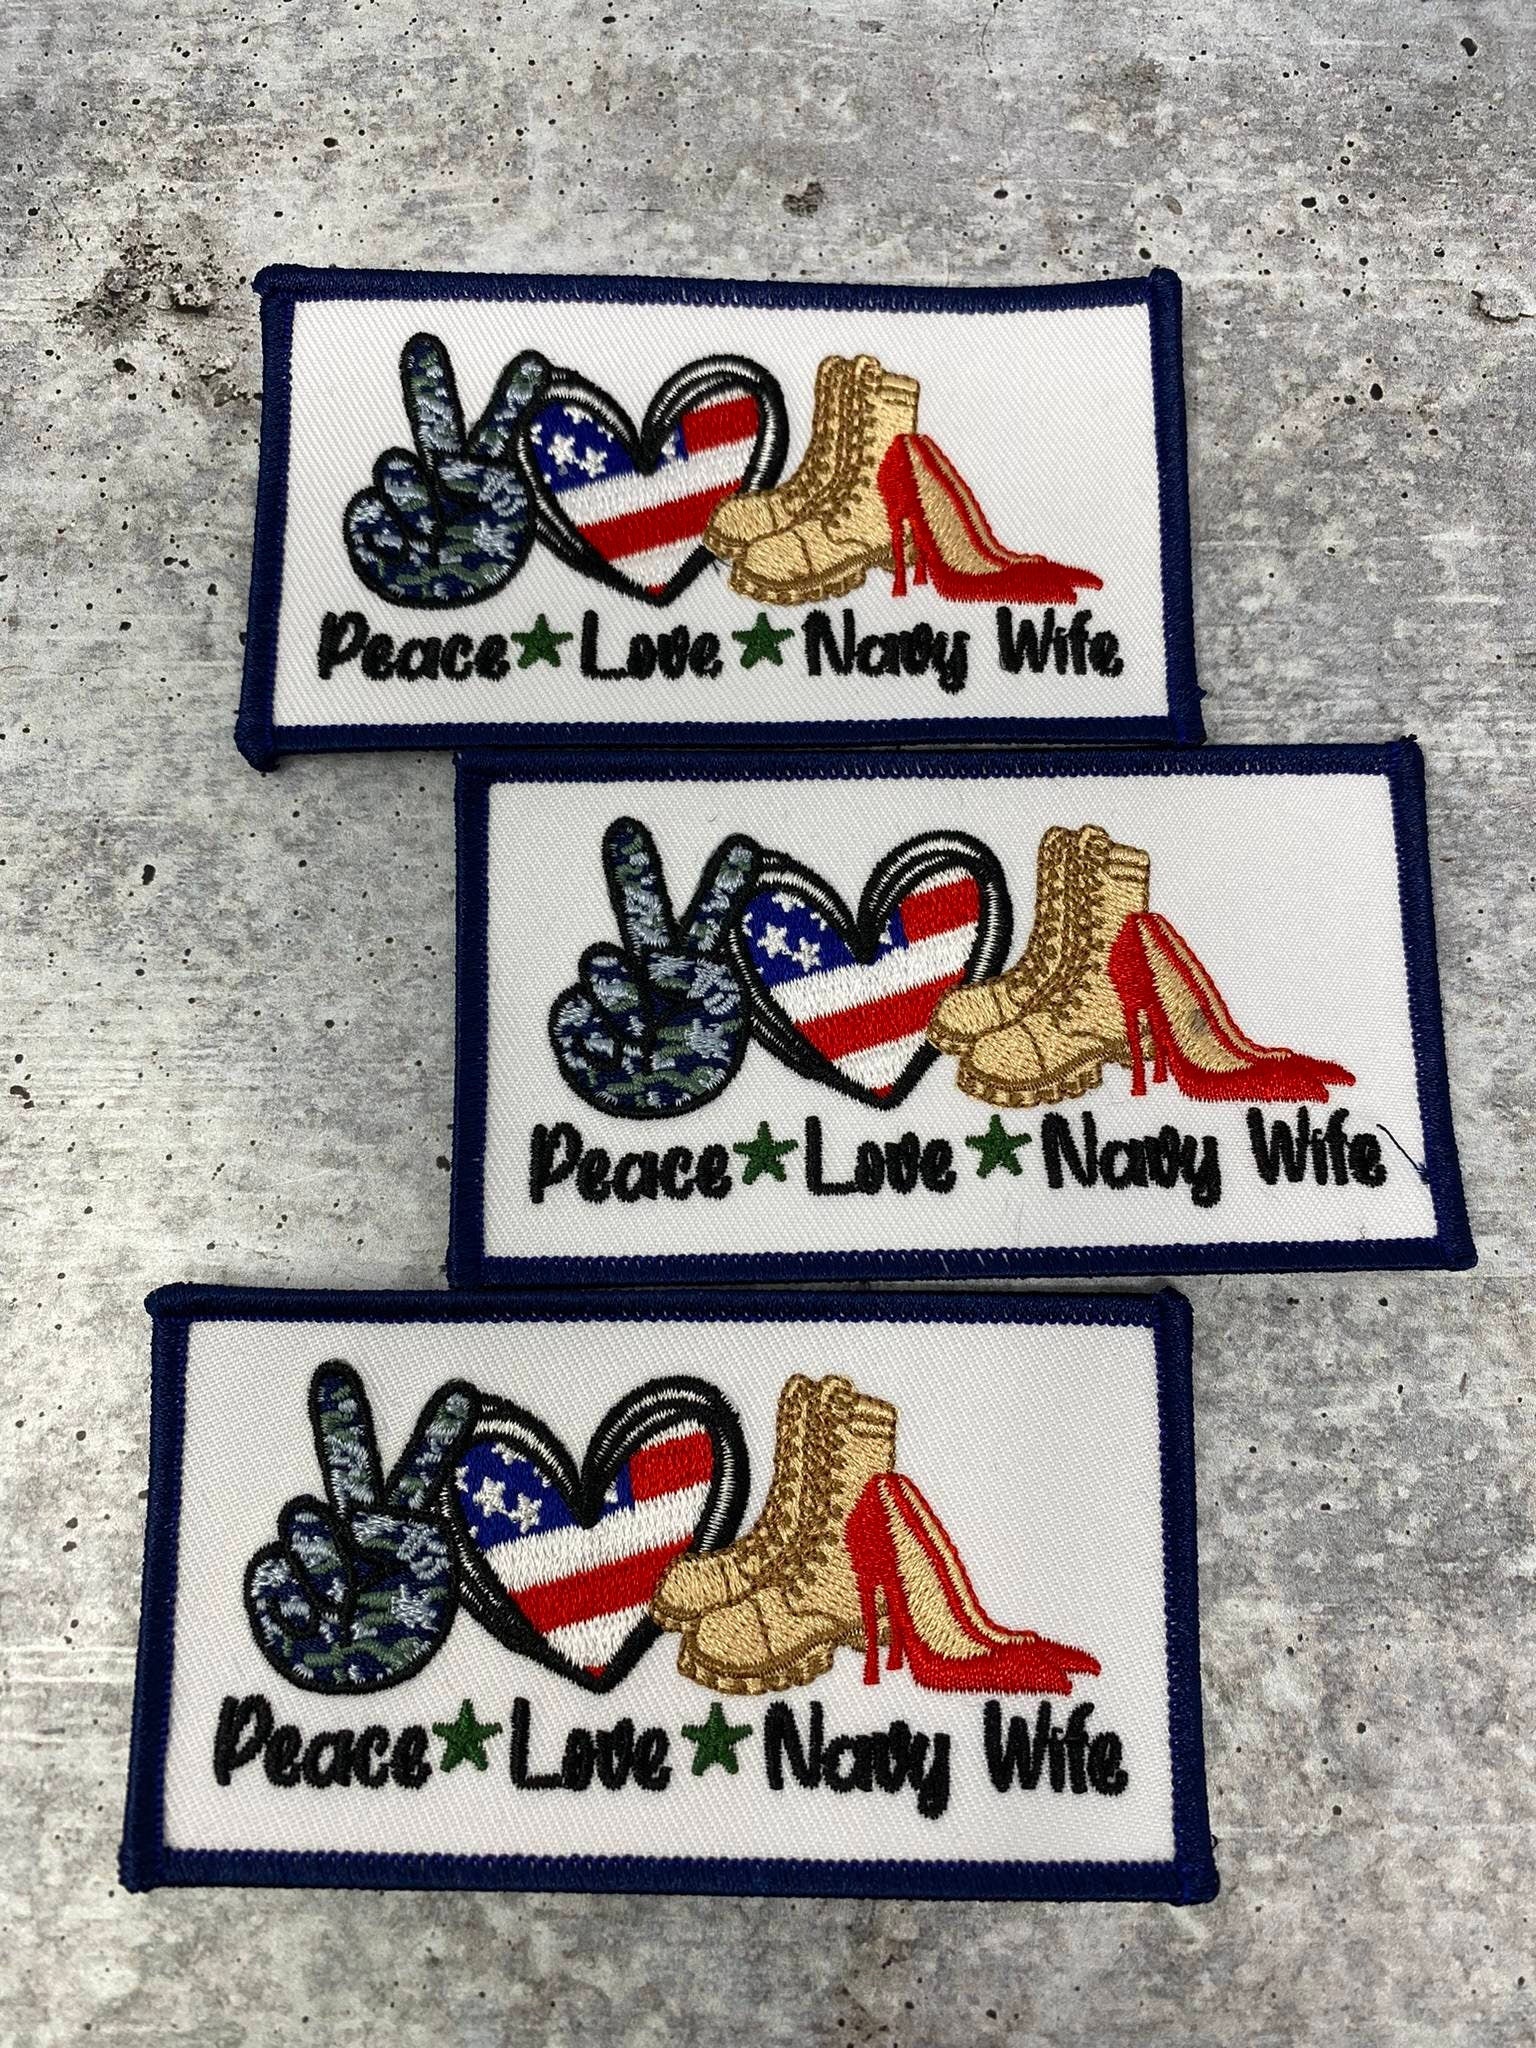 New, 1-pc, "Peace. Love. NAVY Wife" Iron-on Patch, Embroidery Patch, Size 3"x 2", Military Wife Badge, Patch for Crocs, Jackets, & DIY Craft